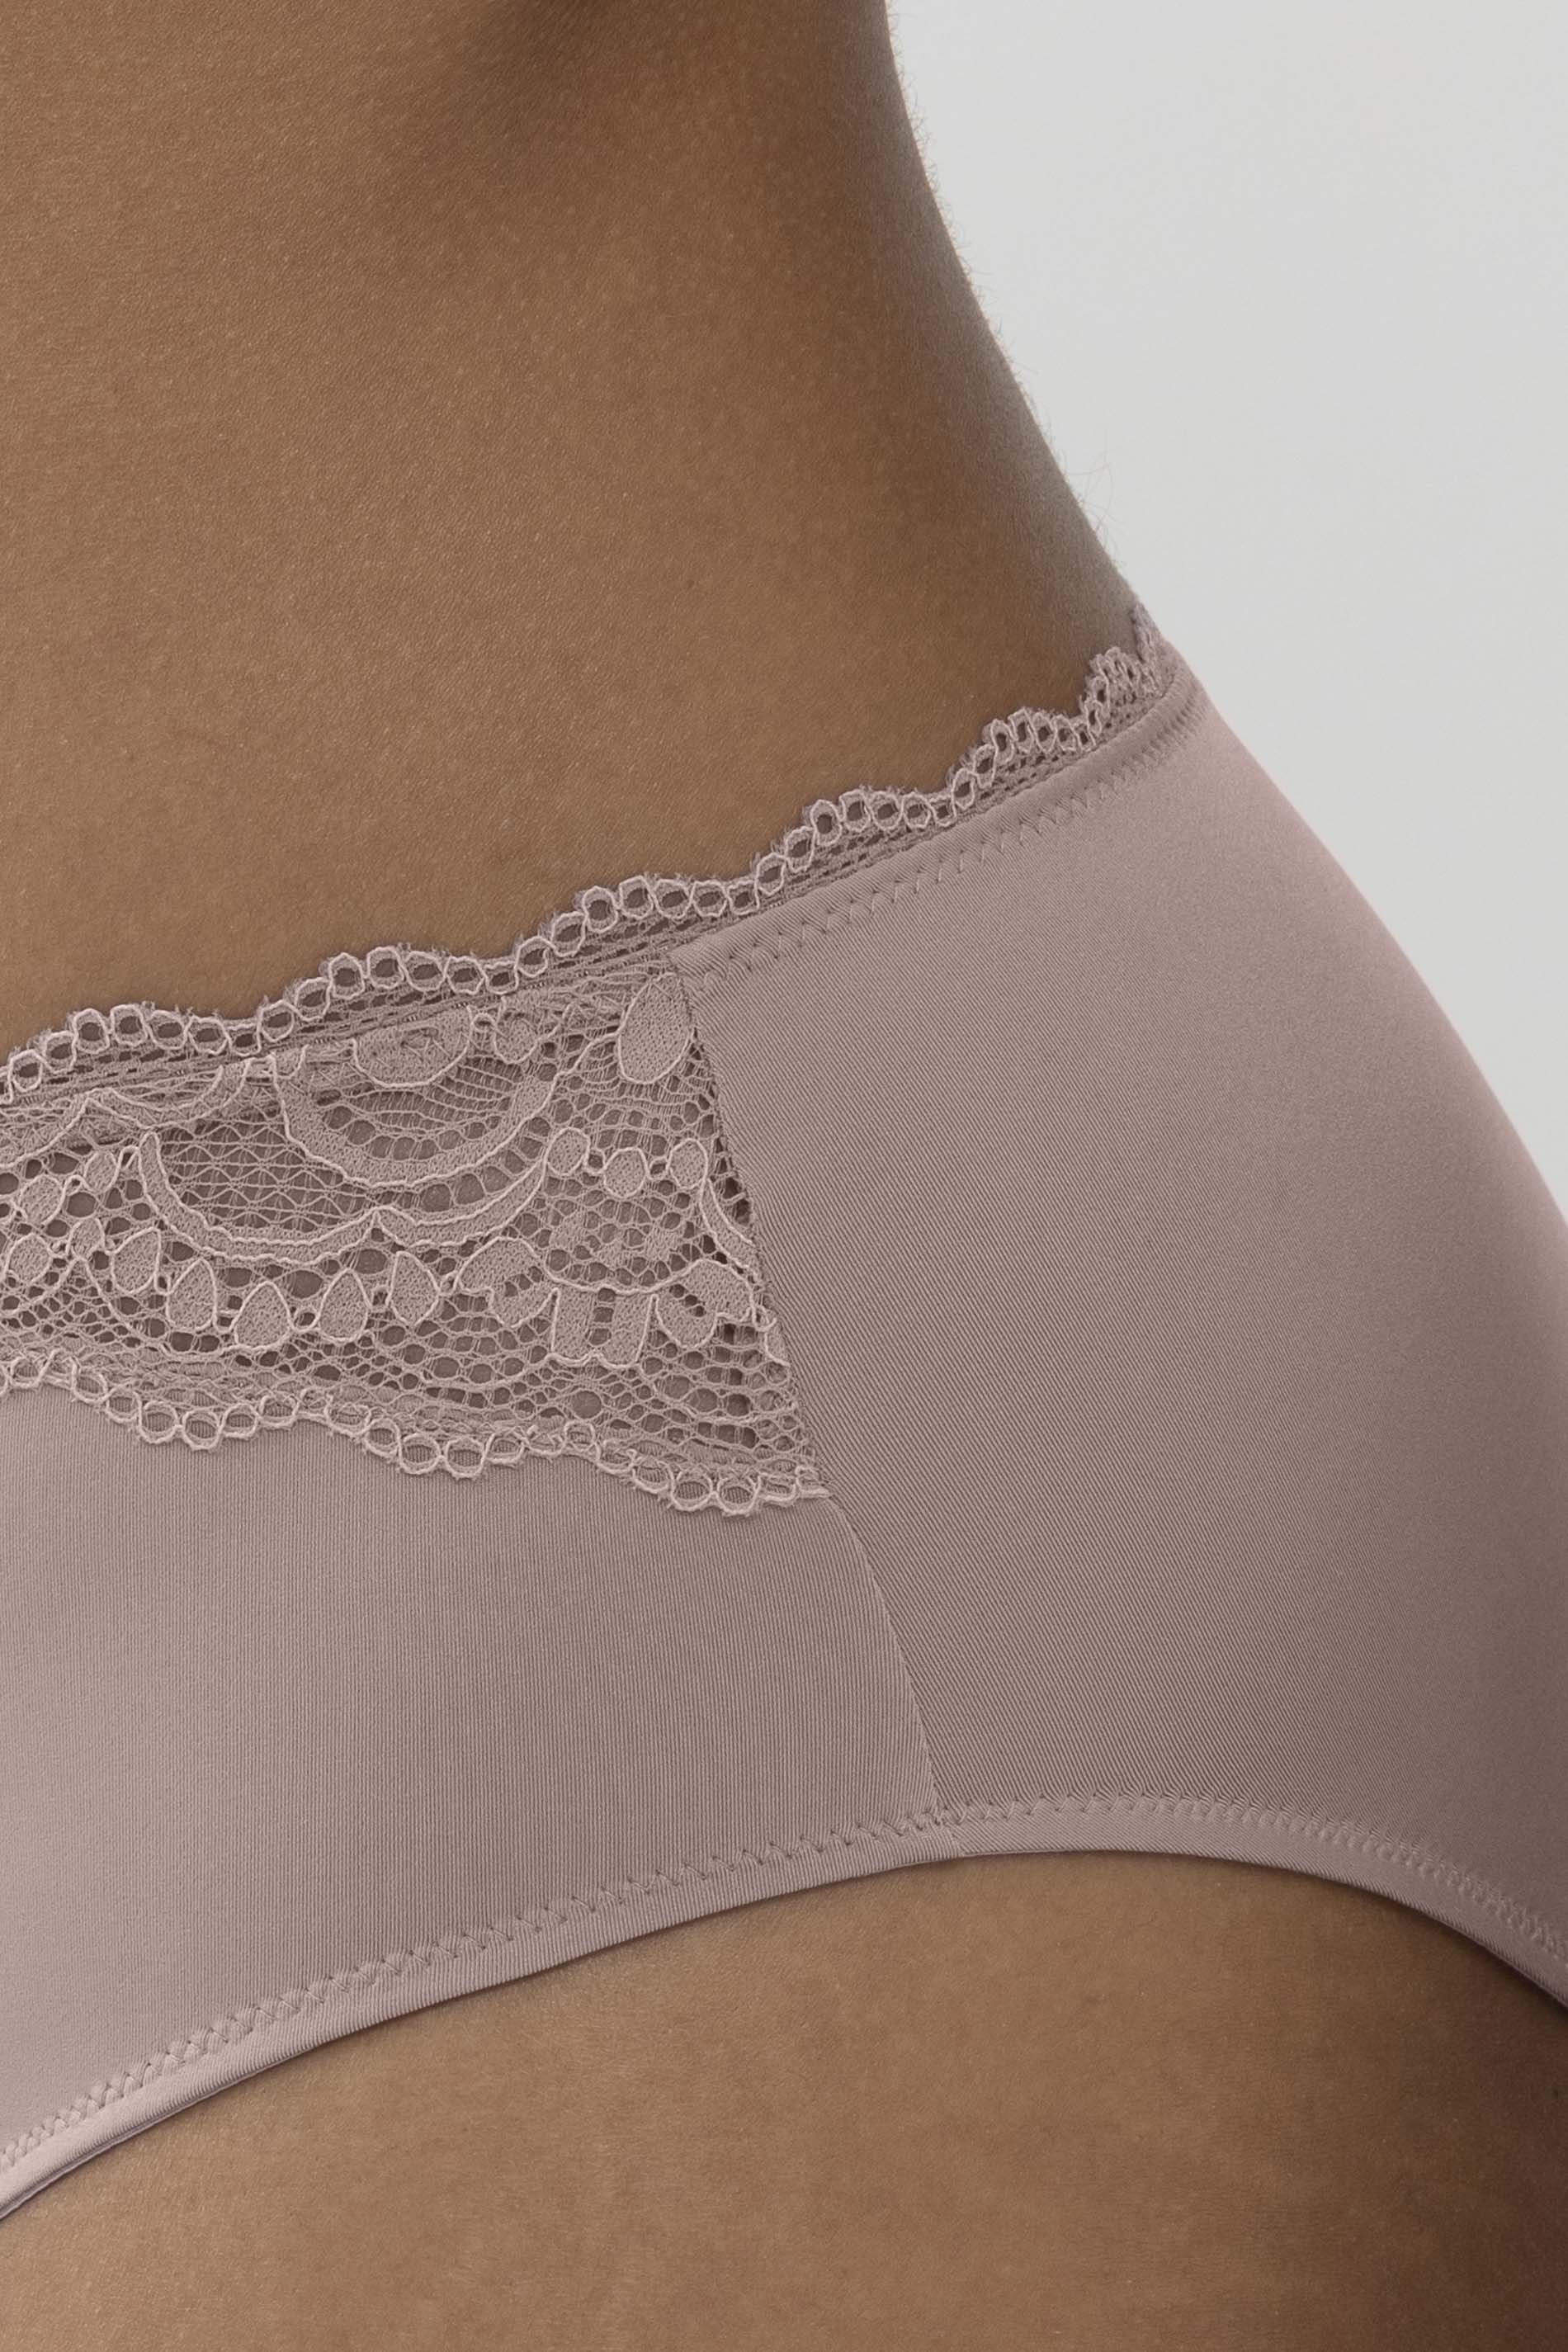 American briefs Serie Amorous Detail View 01 | mey®